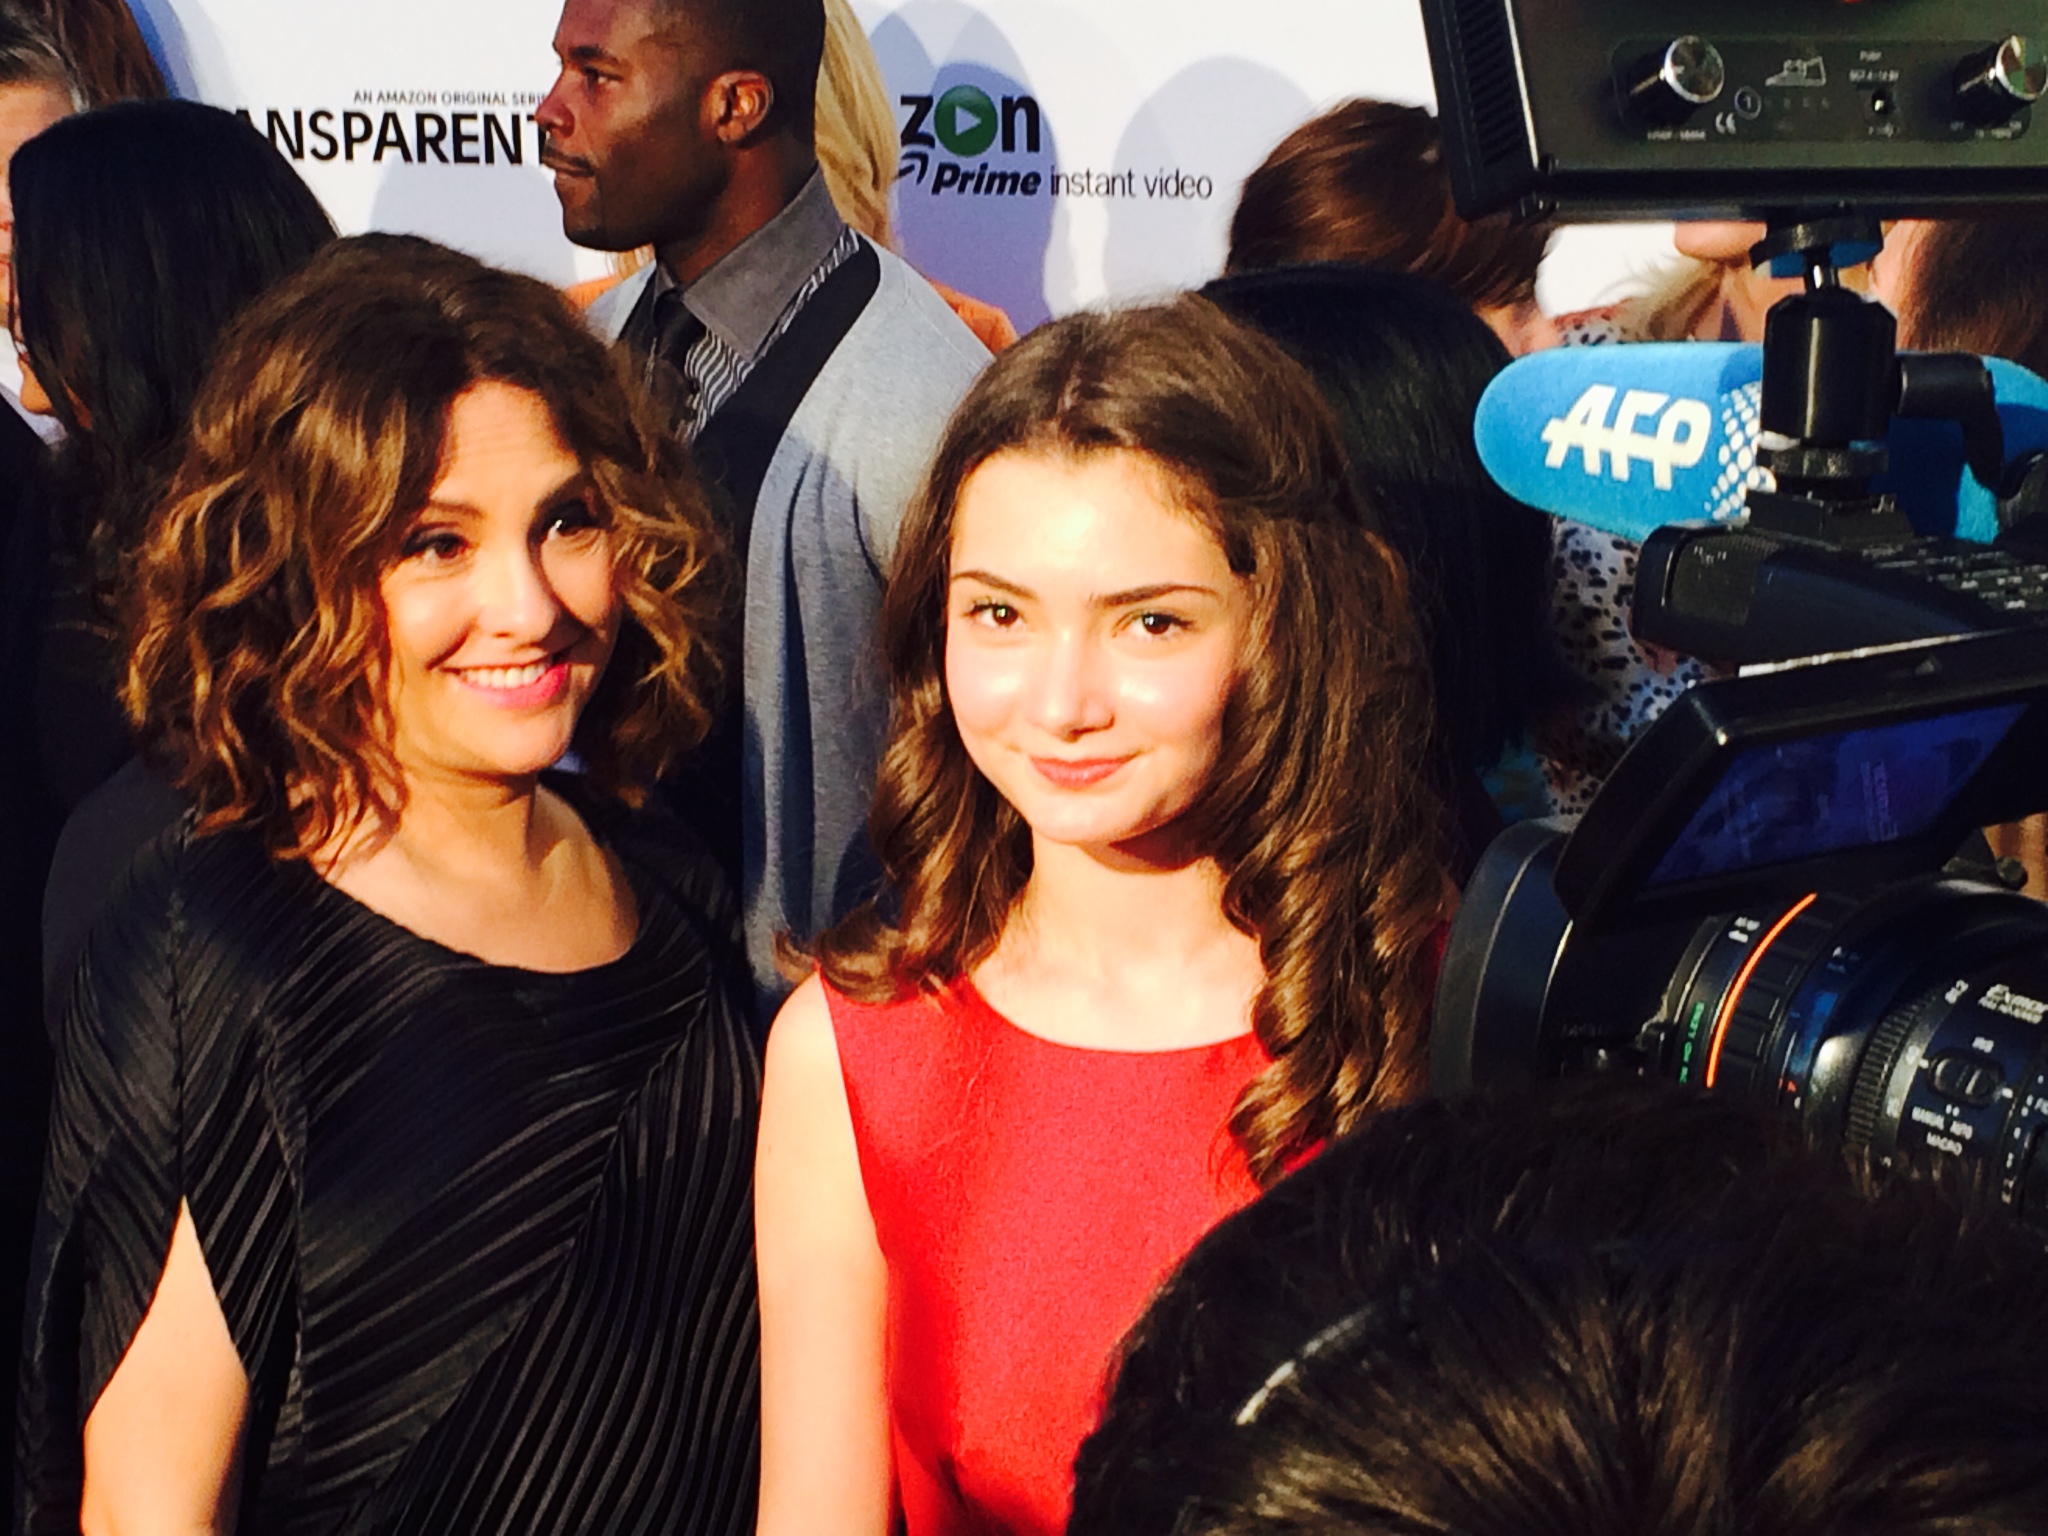 Jill Soloway and Emily Robinson at Transparent premiere